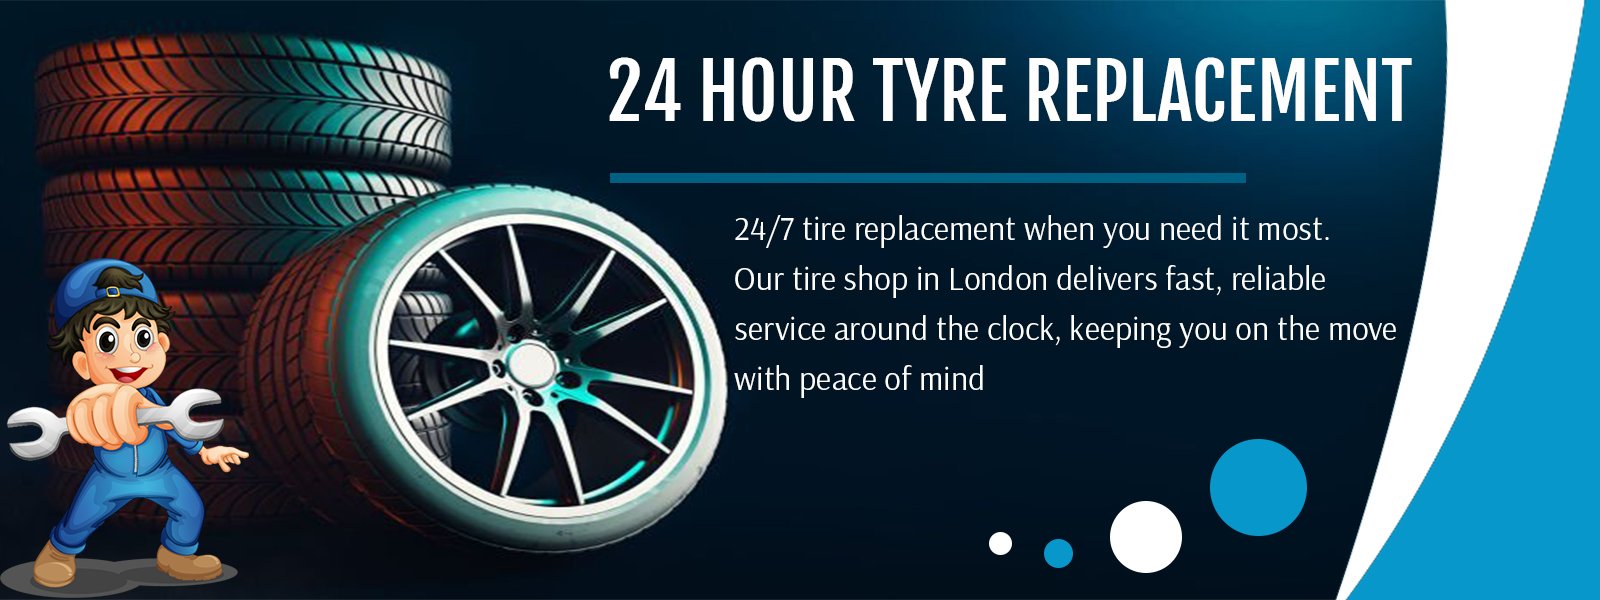 Tyre Replacement West London